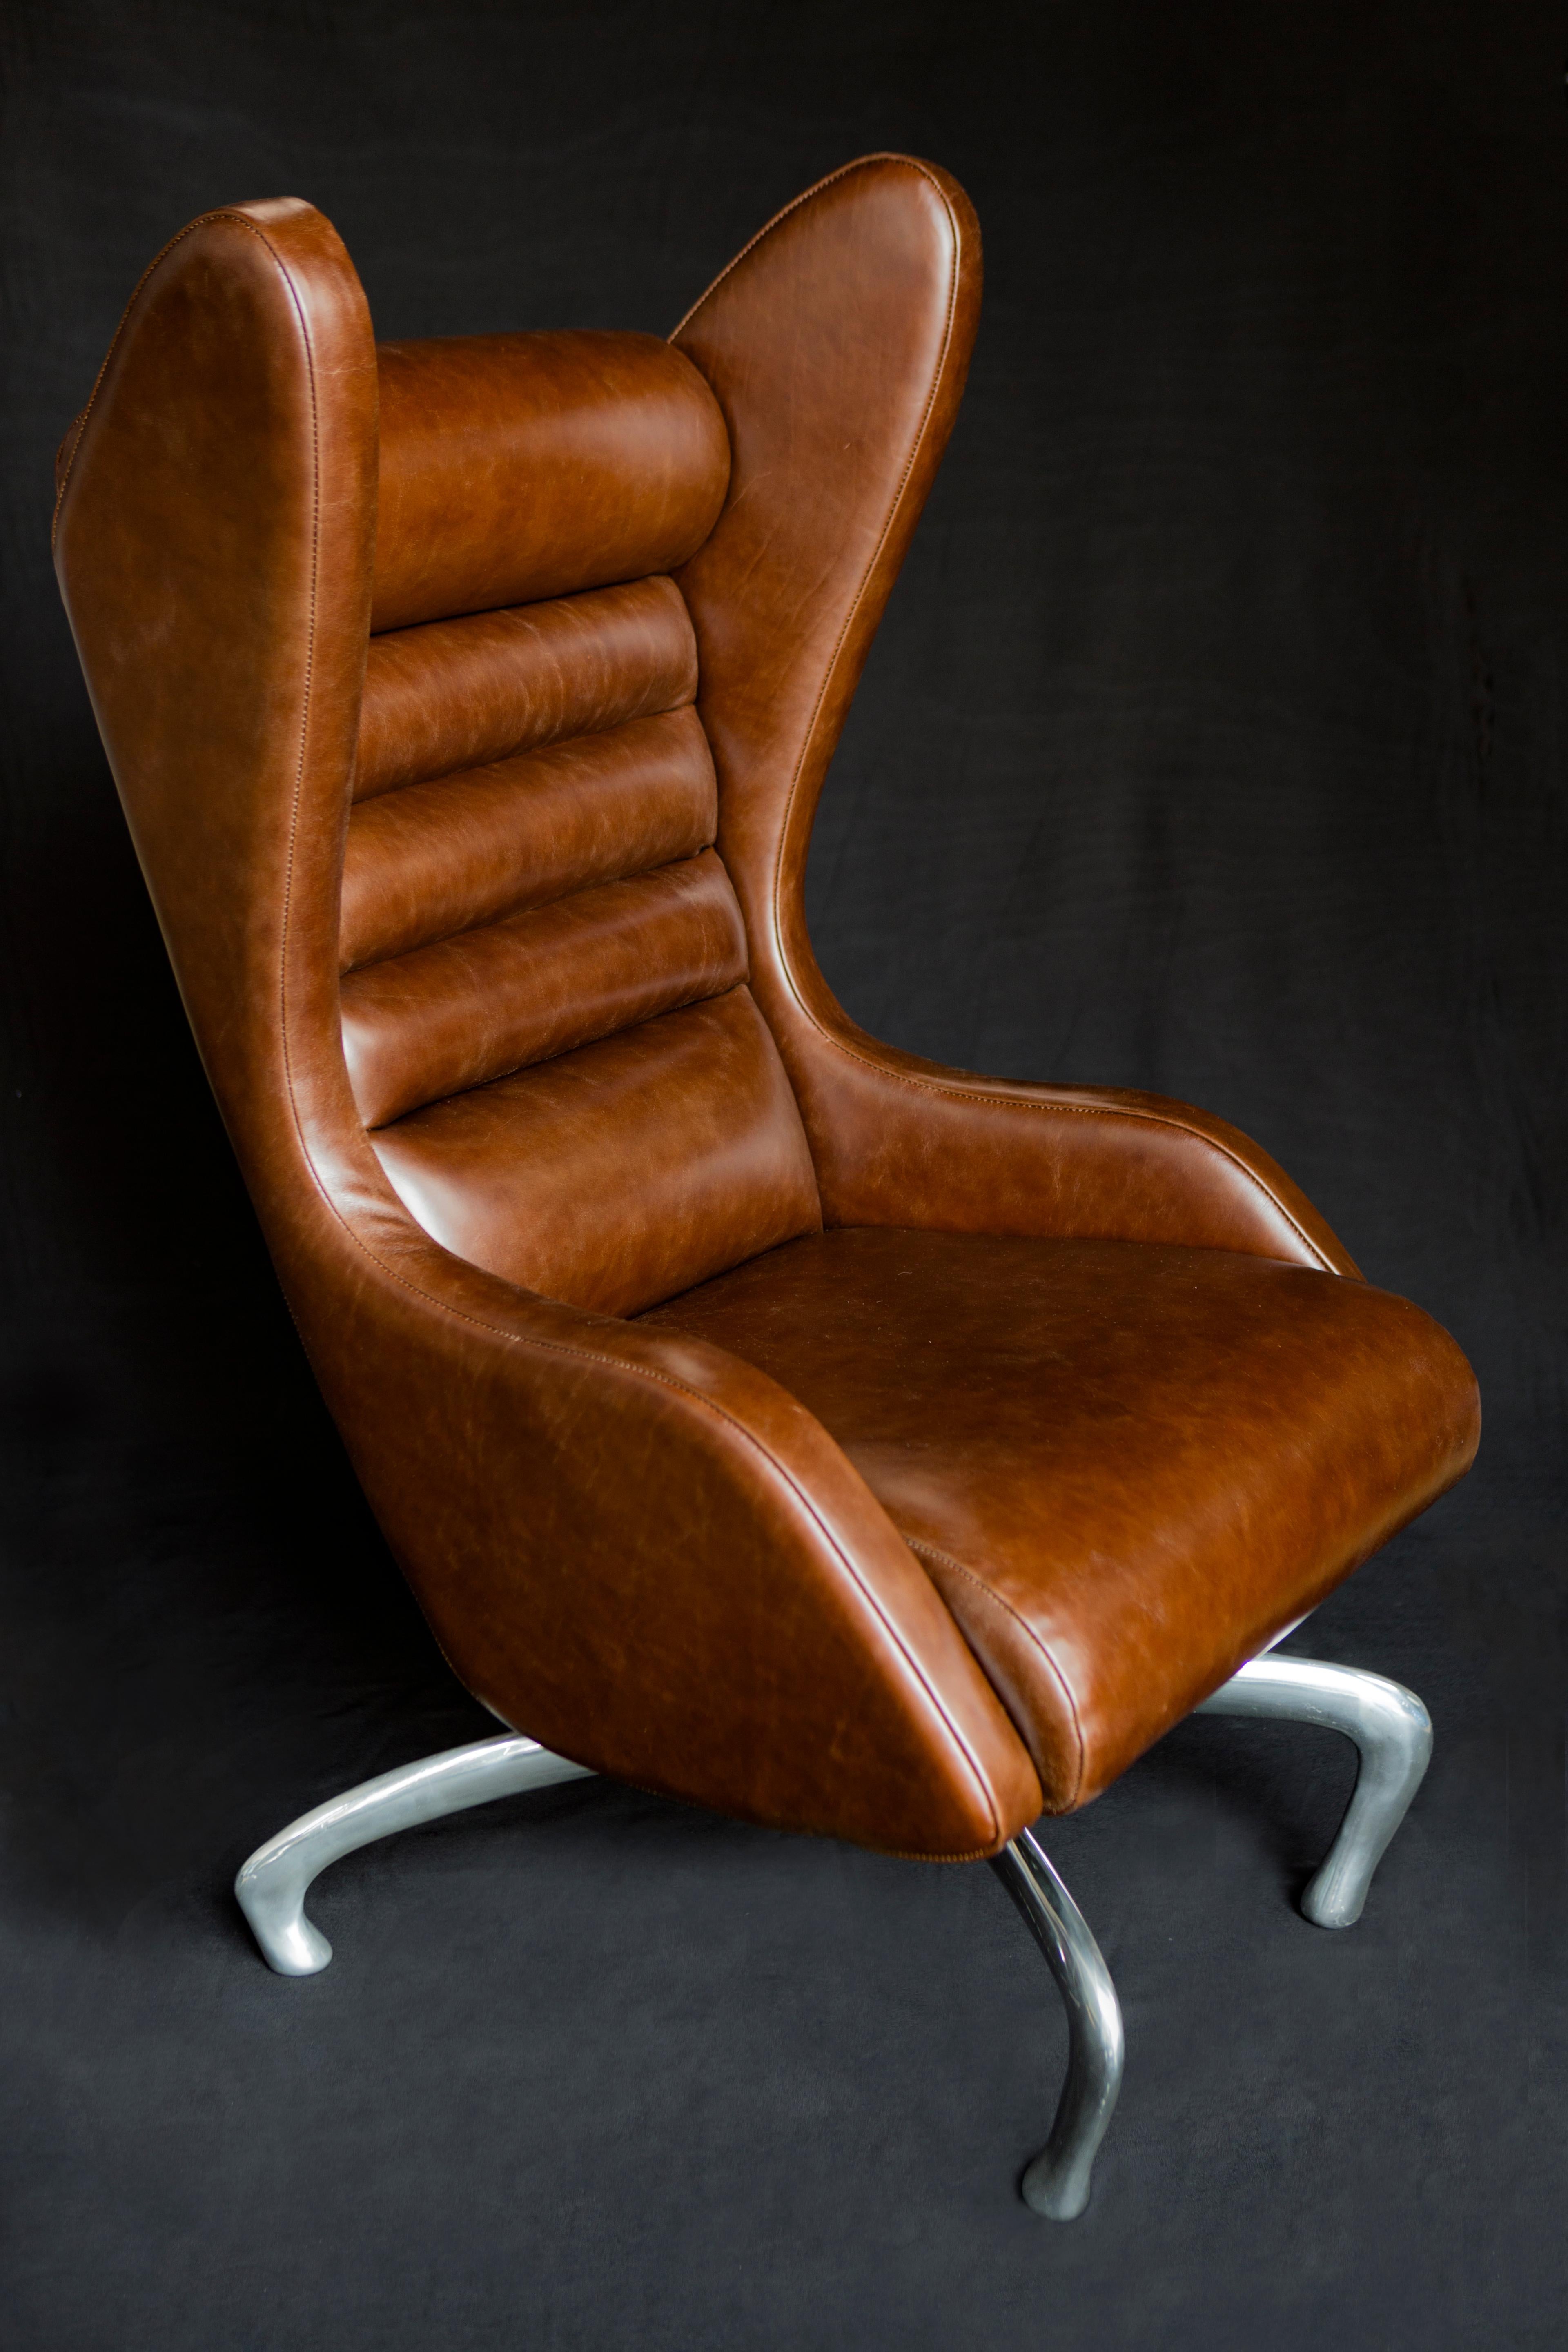 Cantering Lounge Chair, Leather / Cast Aluminium, Jordan Mozer, USA, 2003-2018 In New Condition For Sale In Chicago, IL